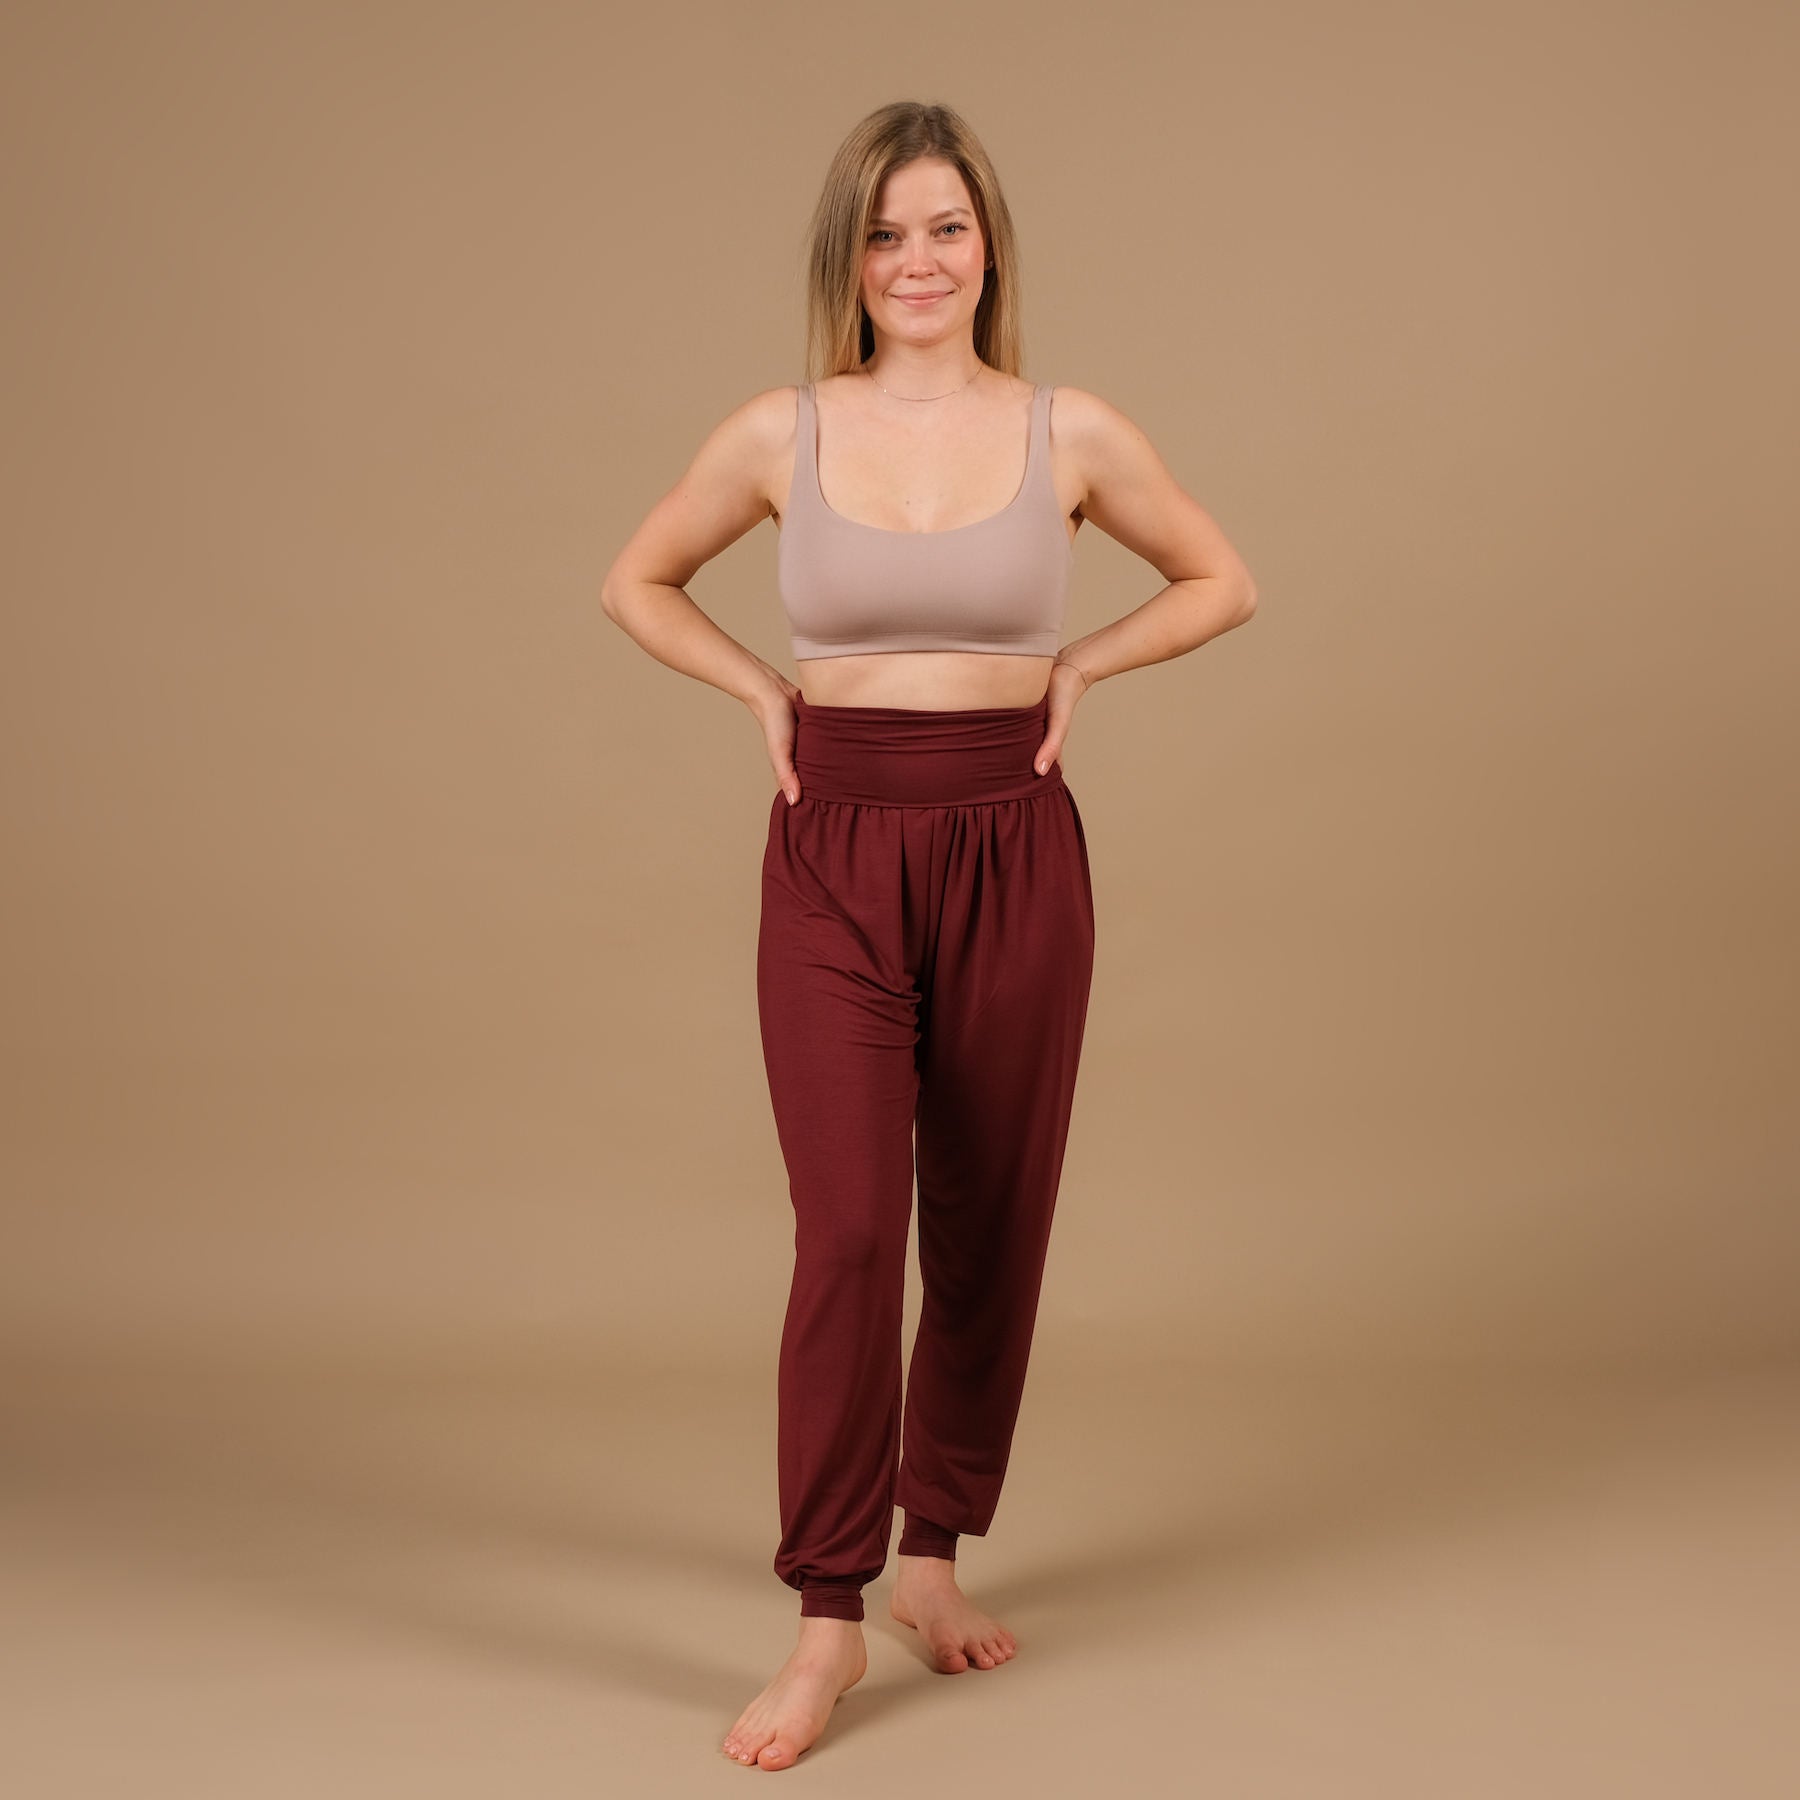 Yoga Bra Comfy mocca, durable, made in Switzerland